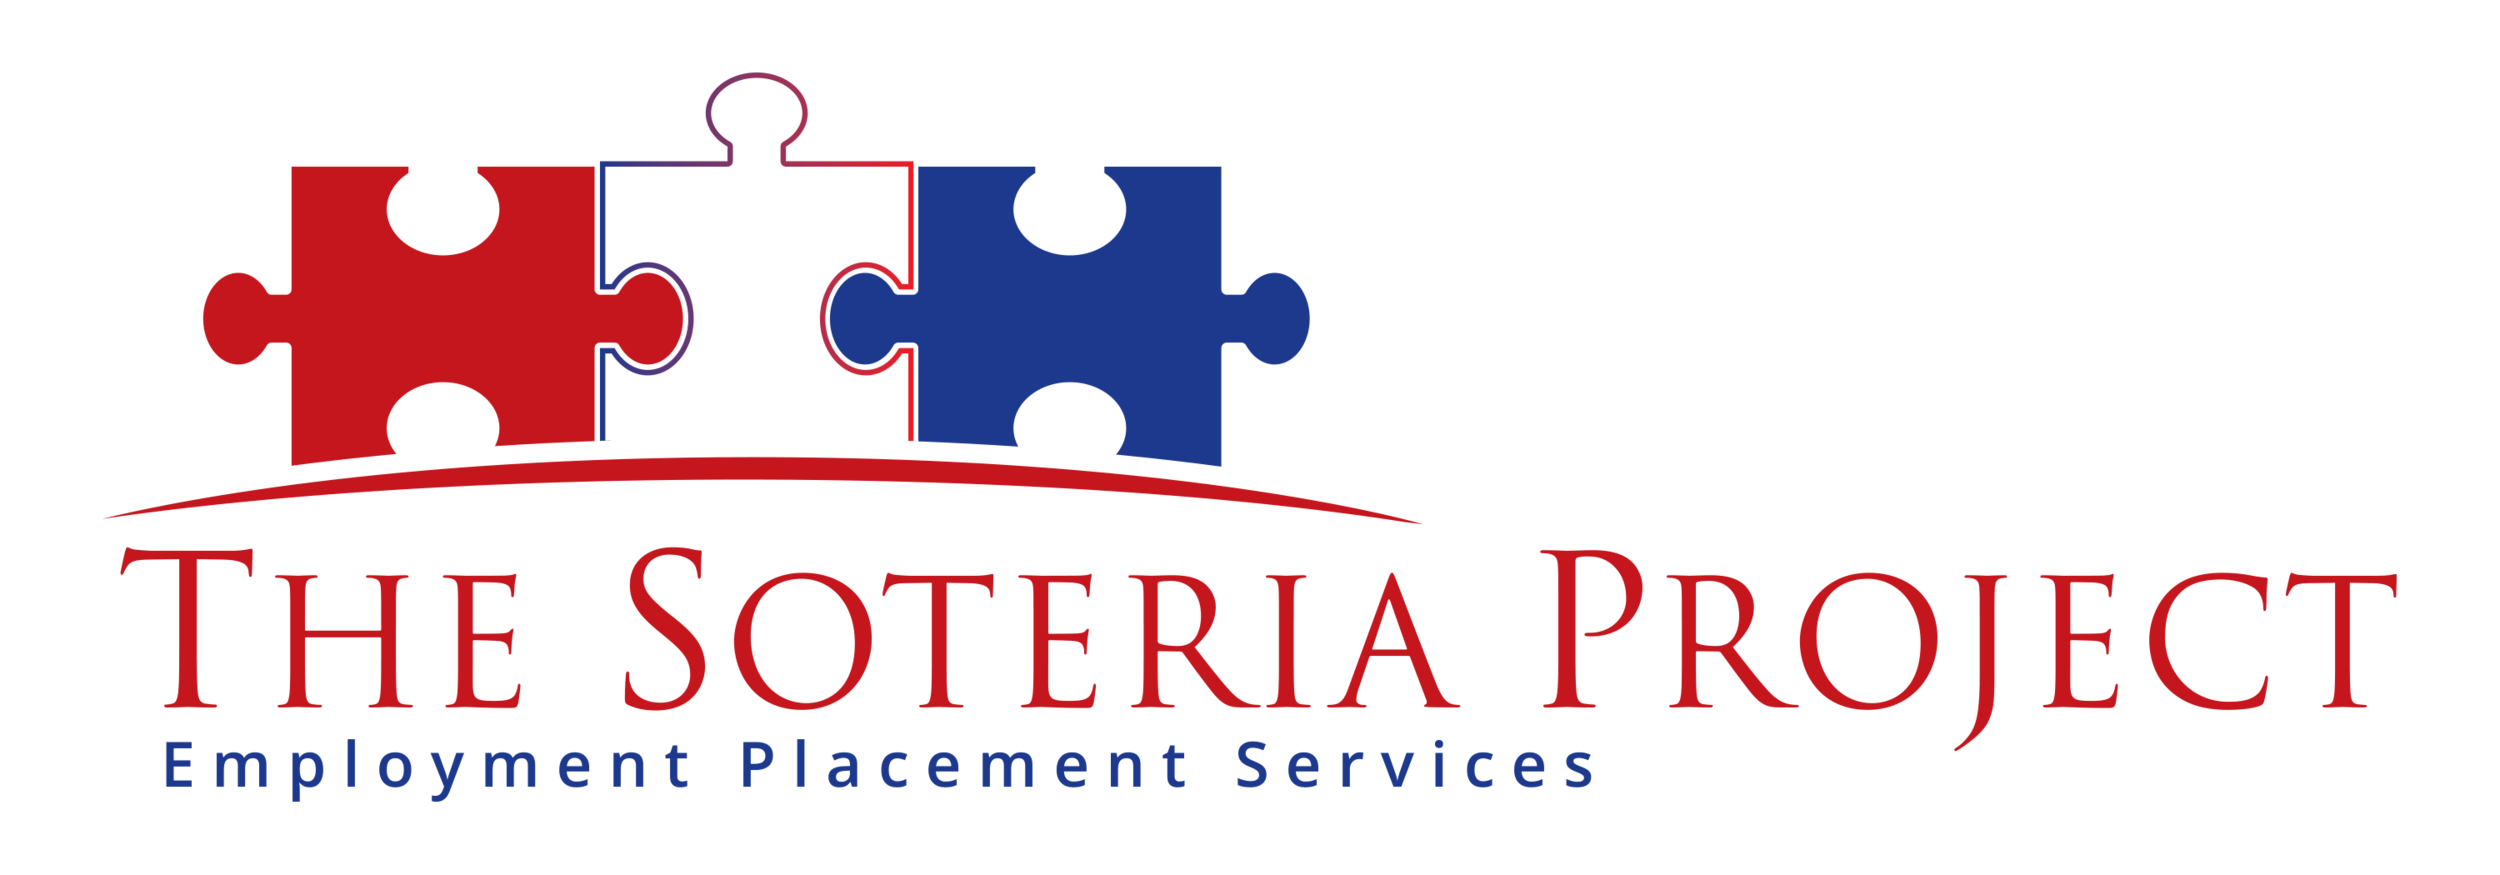 The Soteria Project